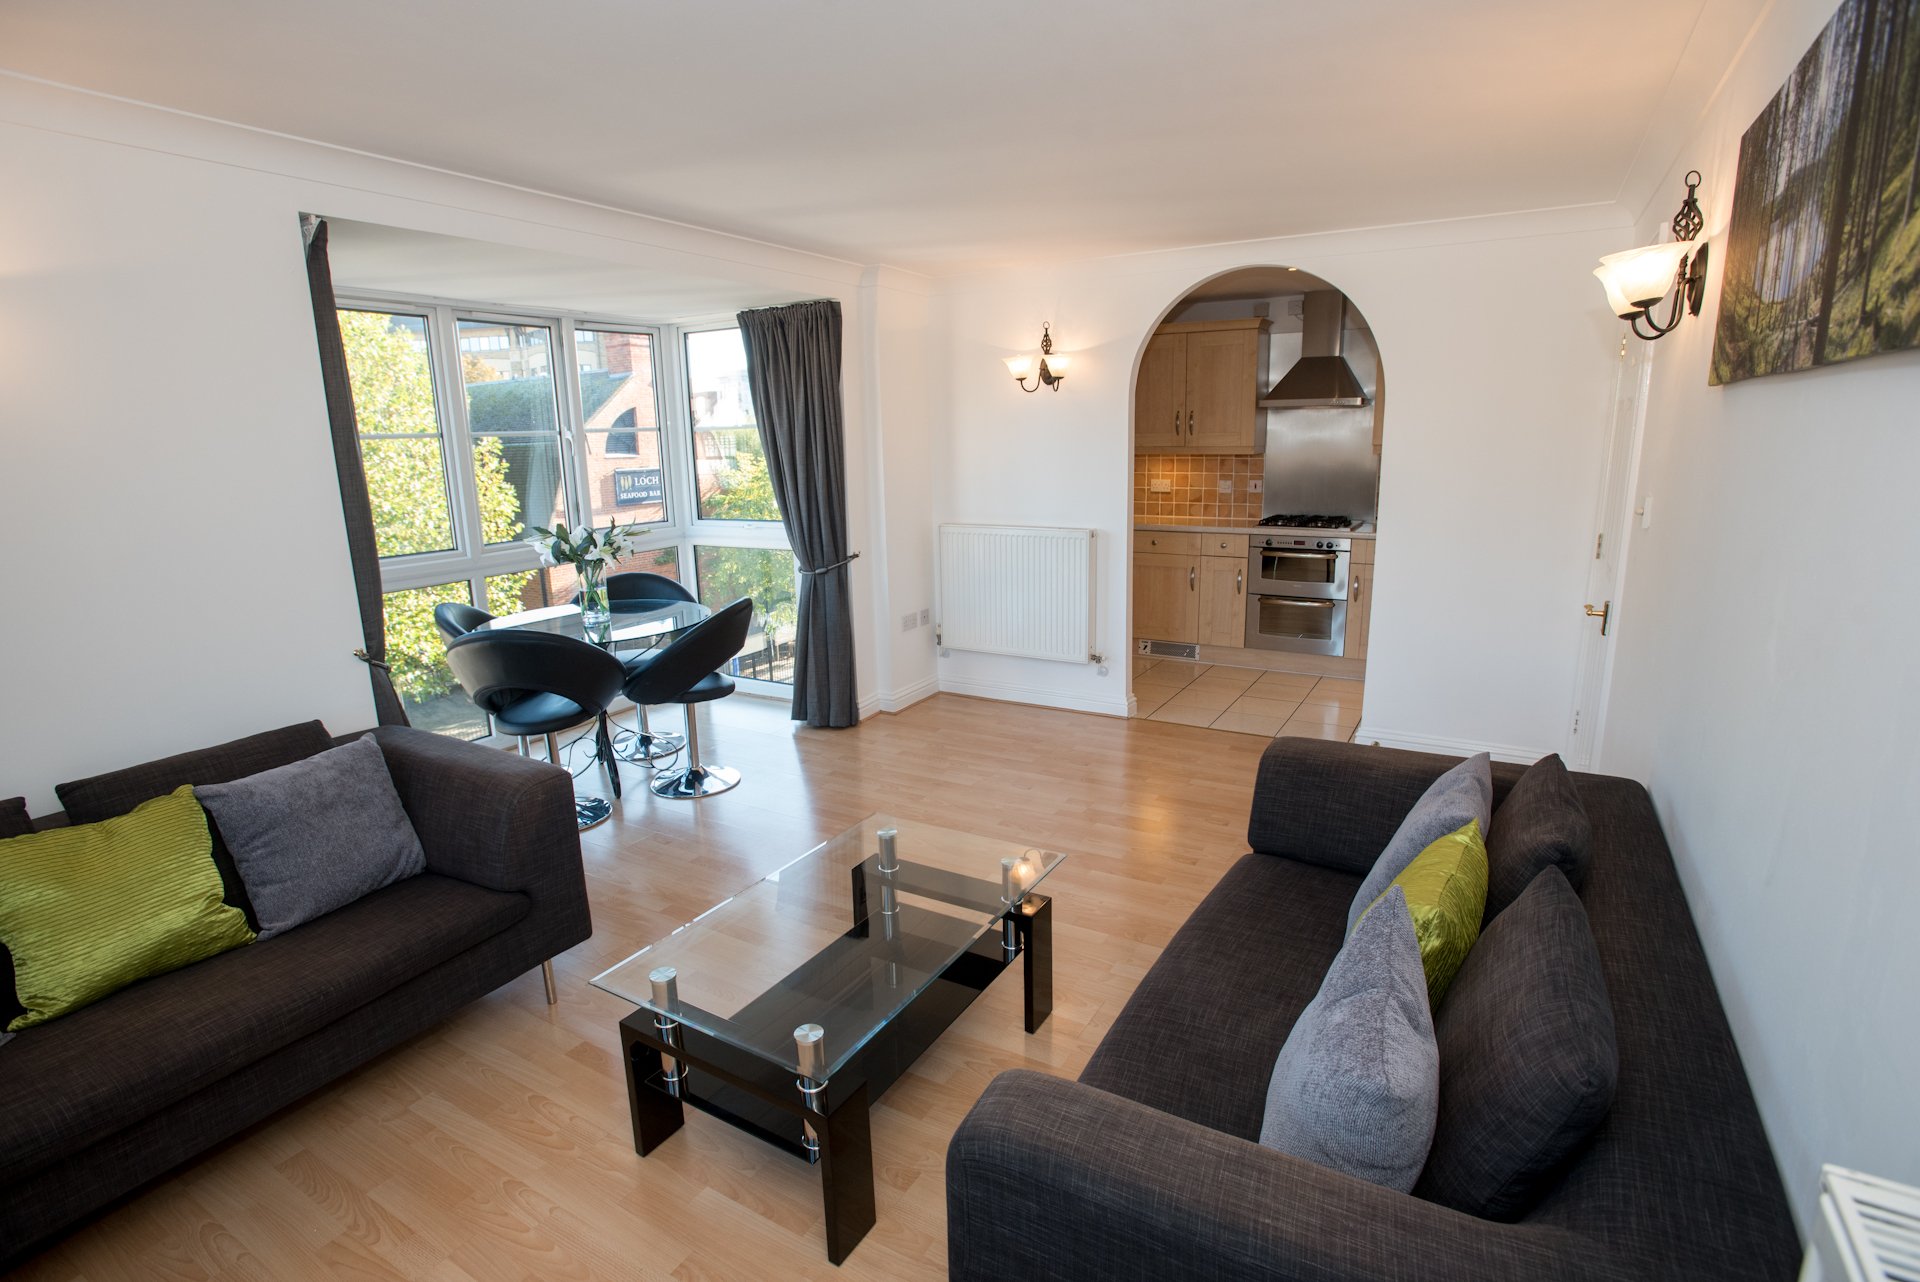 Serviced-Apartments-Reading-|Stylish-&-Modern-Apartments-|-Free-Wifi-|-Fully-Equipped-Kitchen-|-|0208-6913920|-Book-now-at-Urban-Stay-for-great-offers!